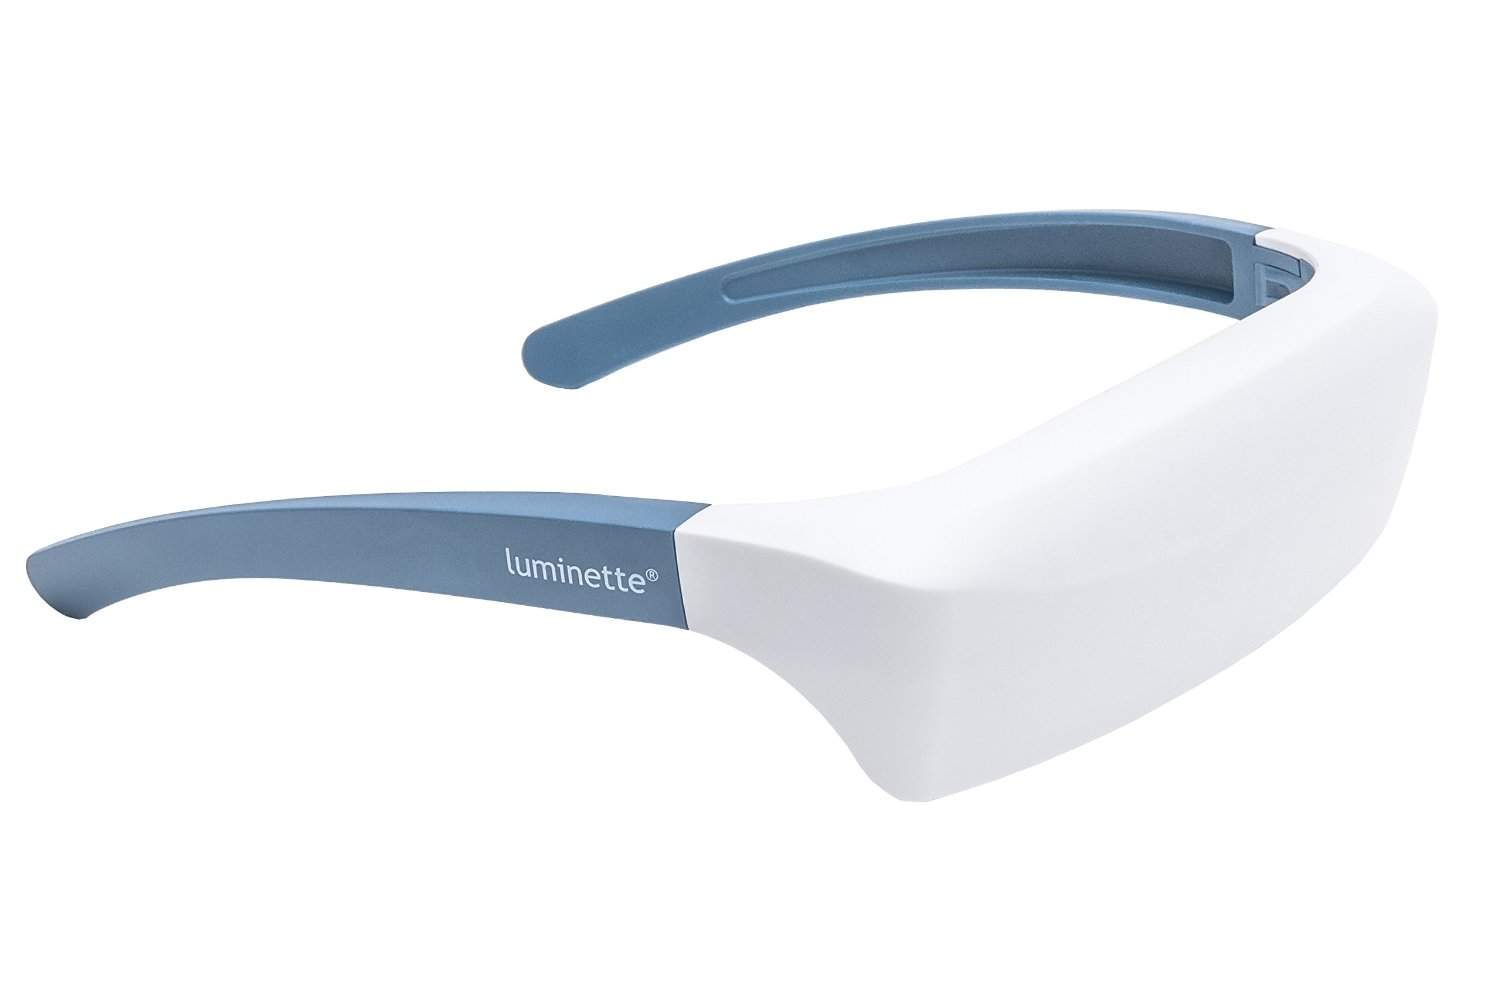 Luminette 2 Wearable Light Therapy Device